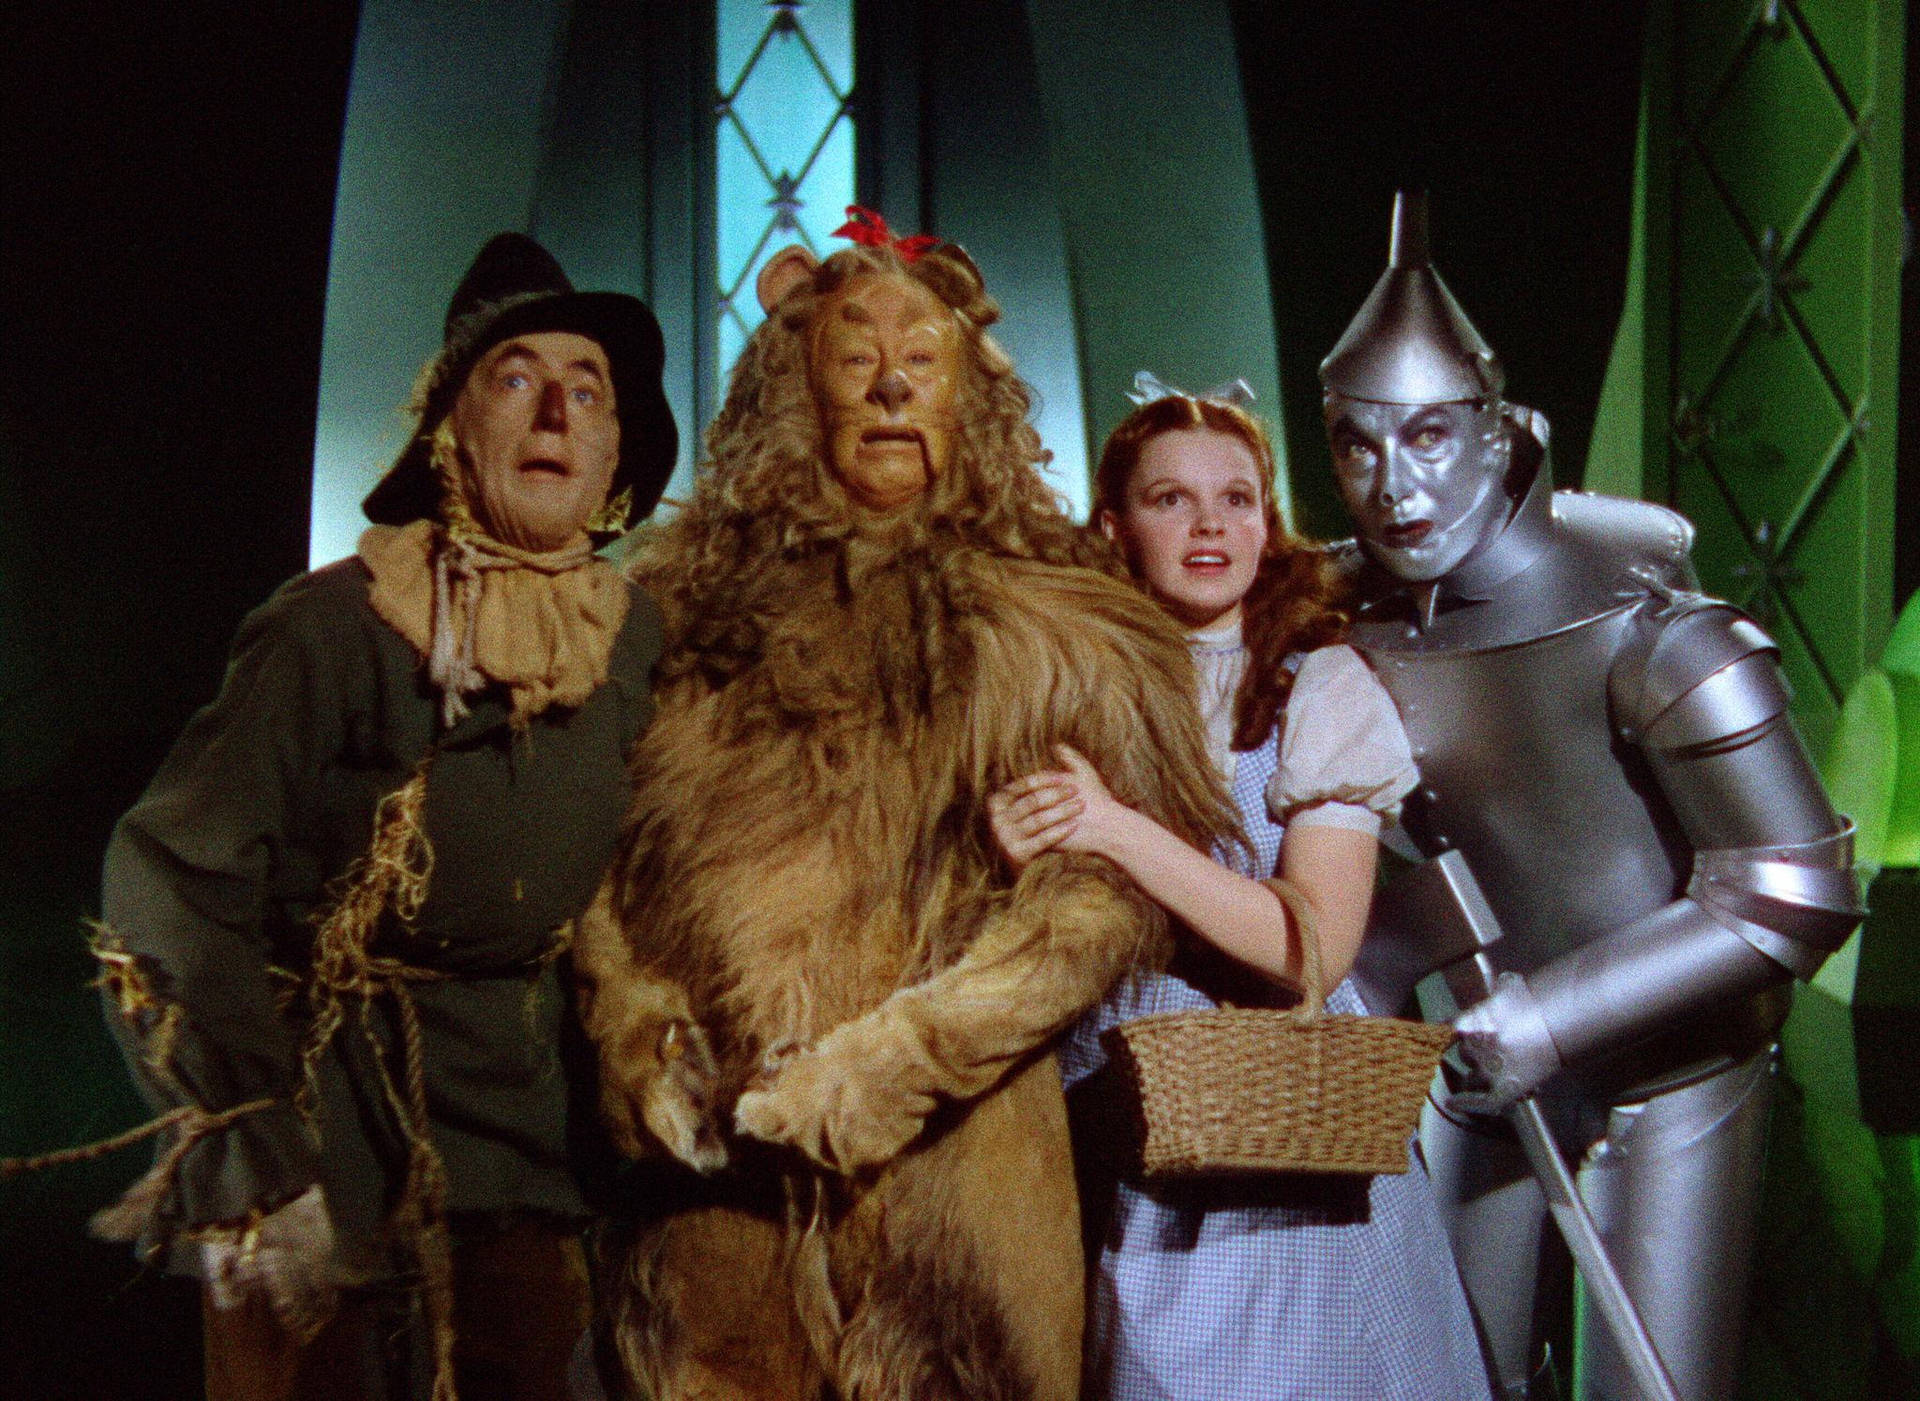 The Wizard Of Oz Cast Inside The Emerald City Palace